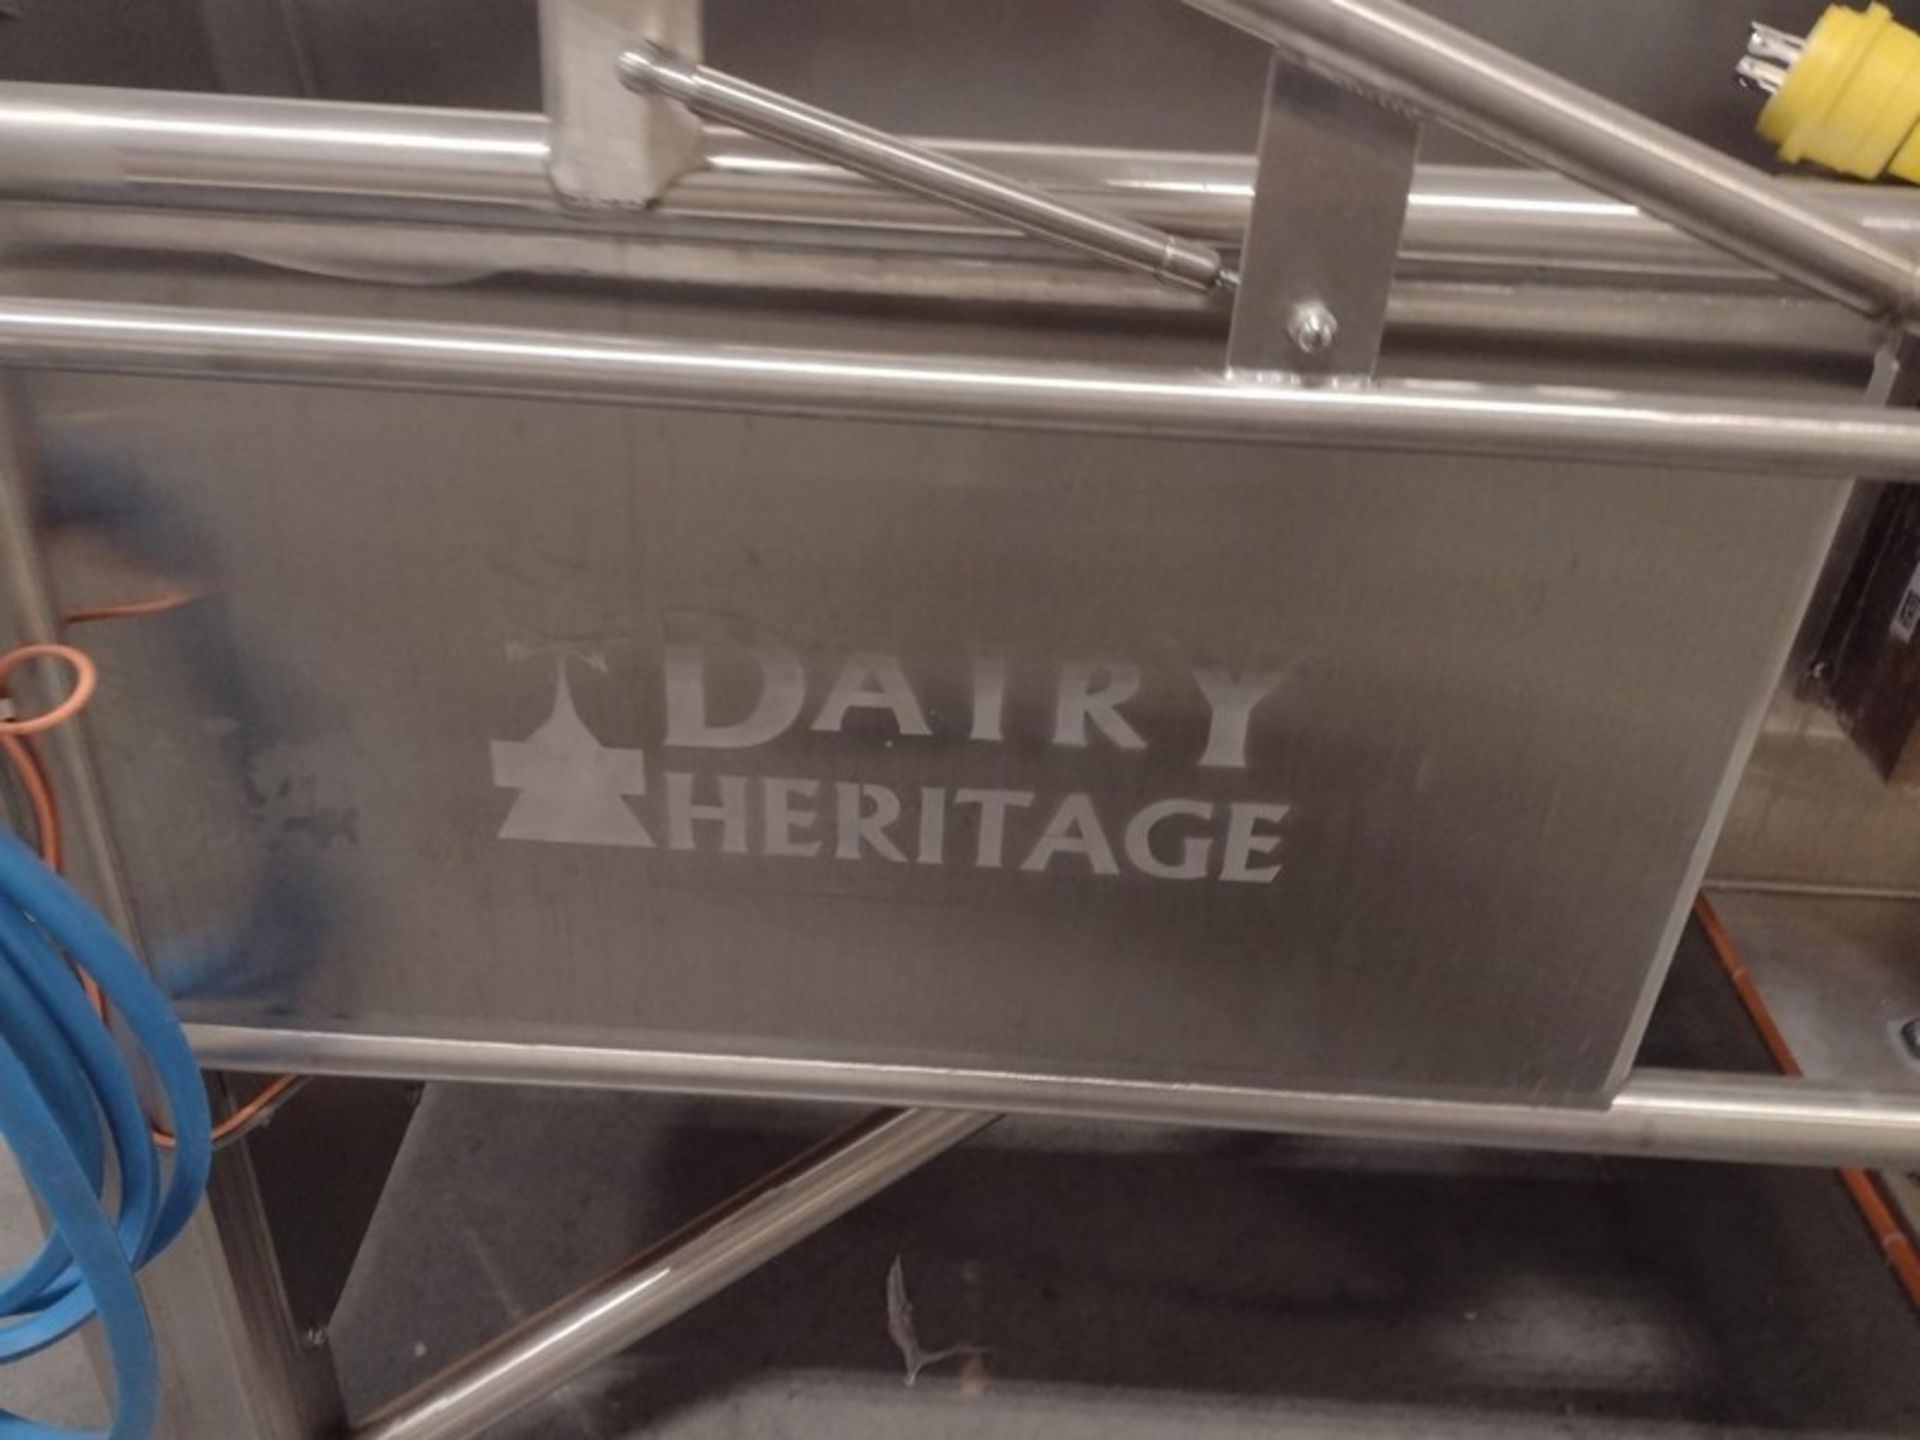 2019 Dairy Heritage 200 Gallon S/S Butter Churn, Less than 100 hours in the last few years with - Image 12 of 18